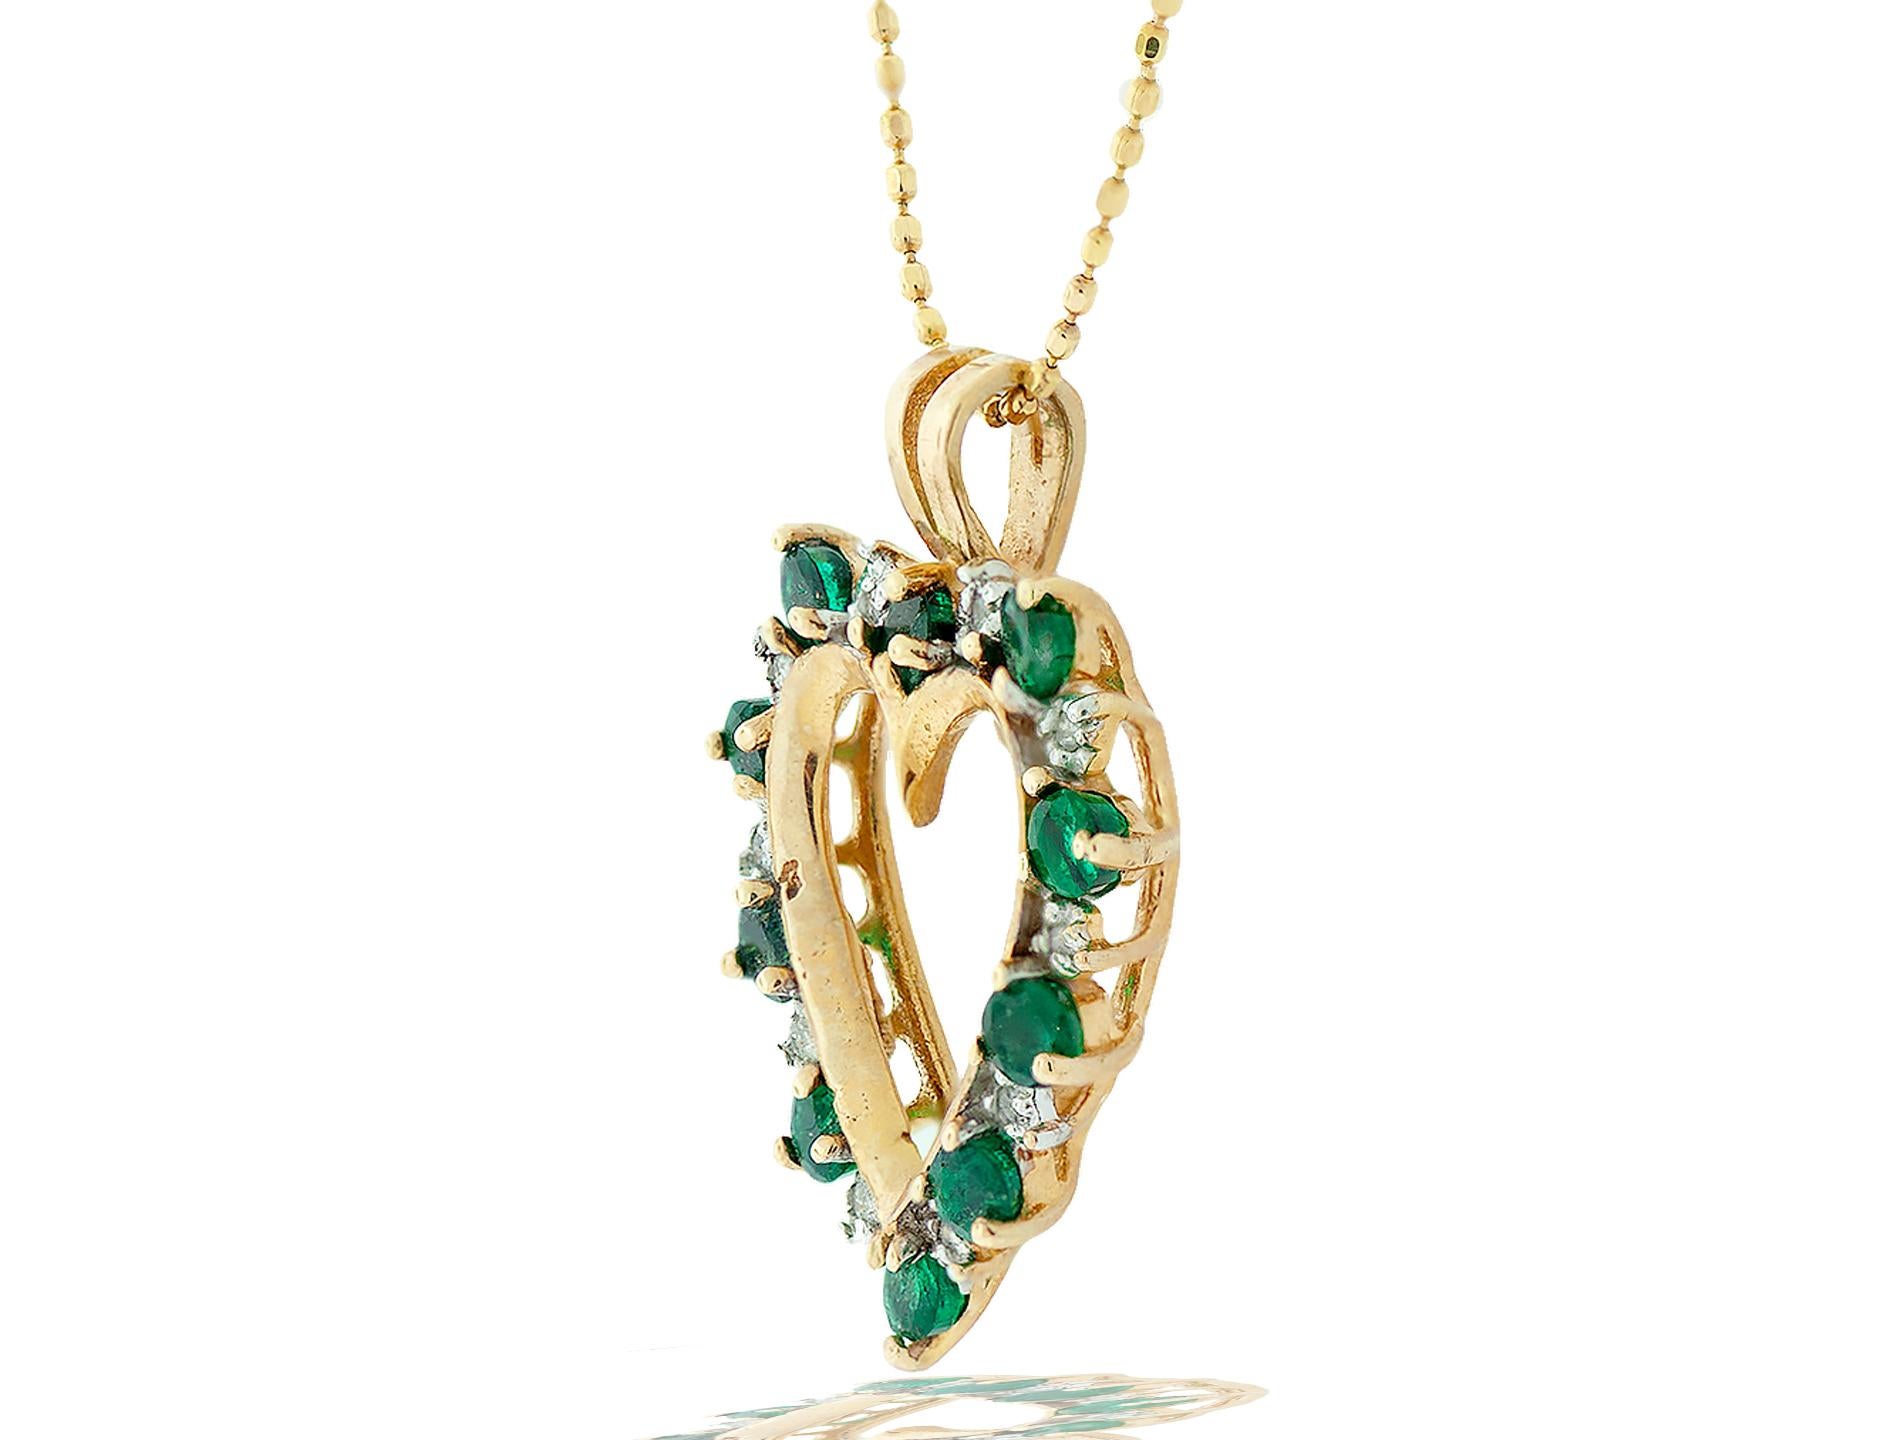 Pristine, Alternating gemstones of Emeralds and Diamond on an Open Heart Pendant with gold Chain
The 1